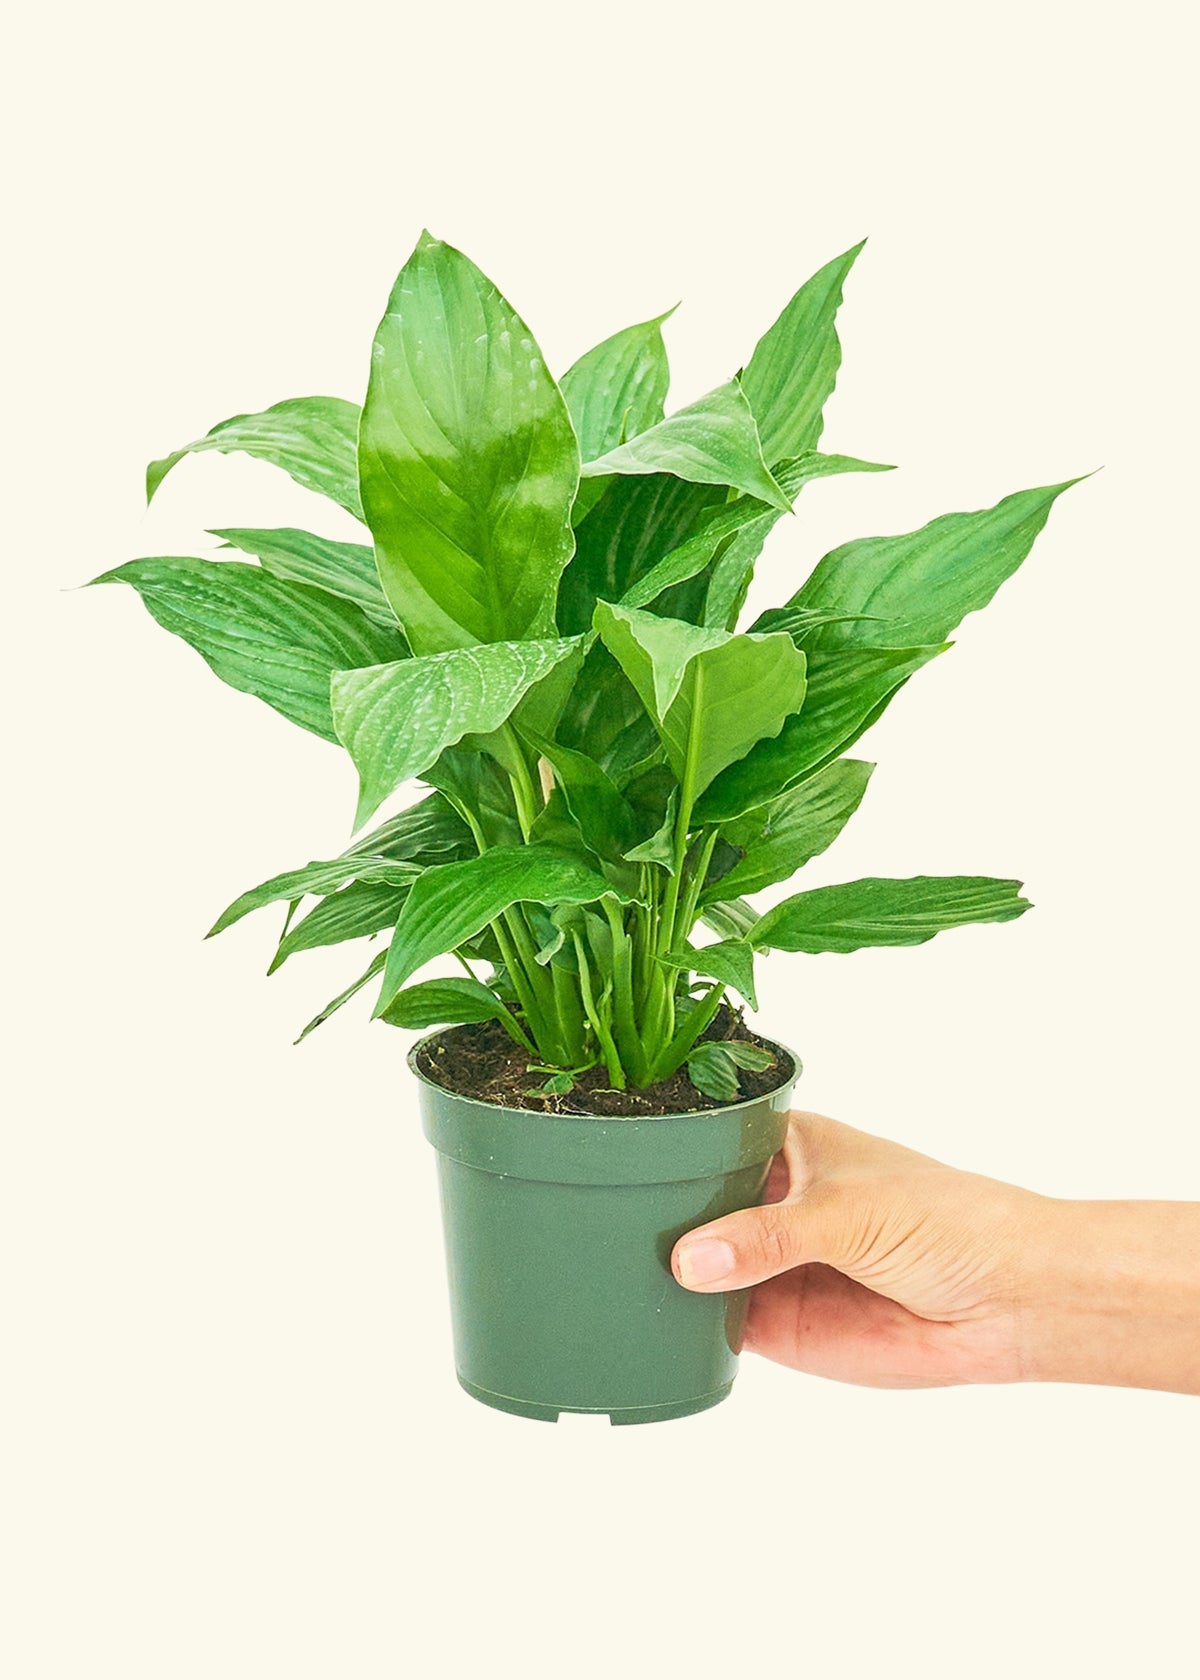 Small Spath Peace Lily (Spathiphyllum wallisii) in a grow pot.